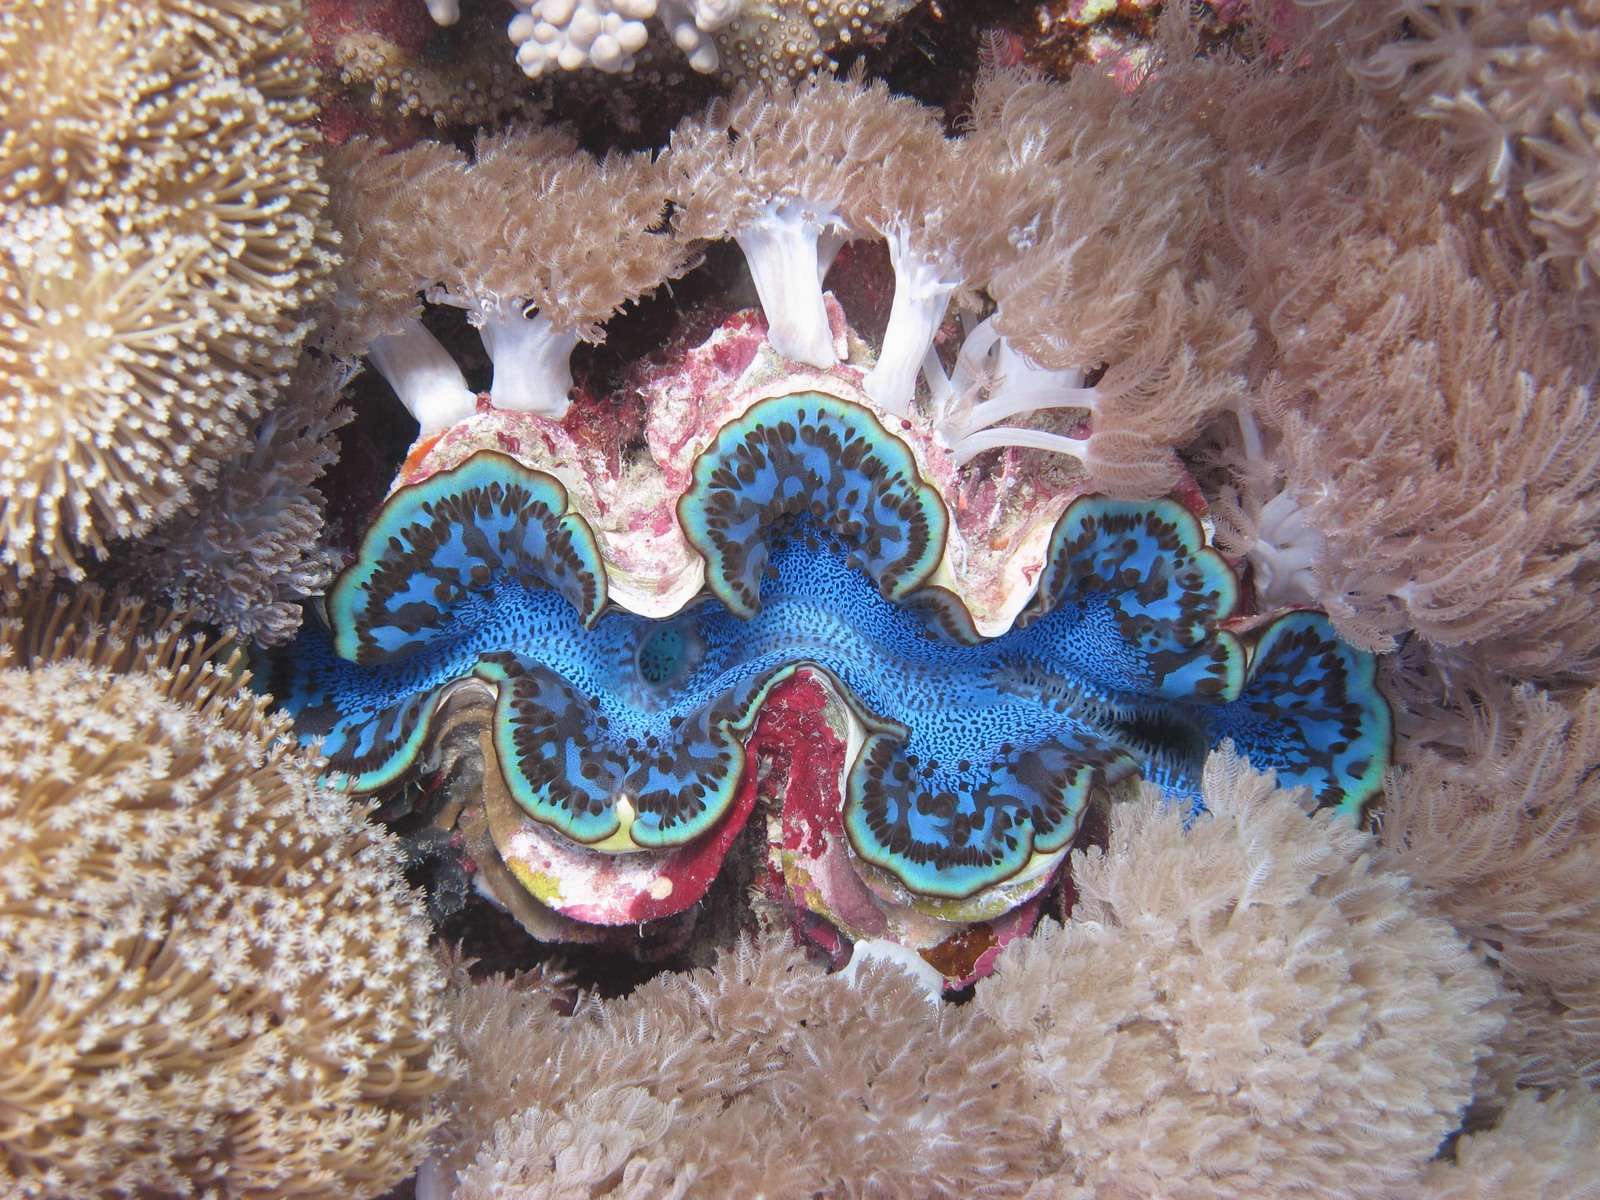 How Big Are Giant Clams